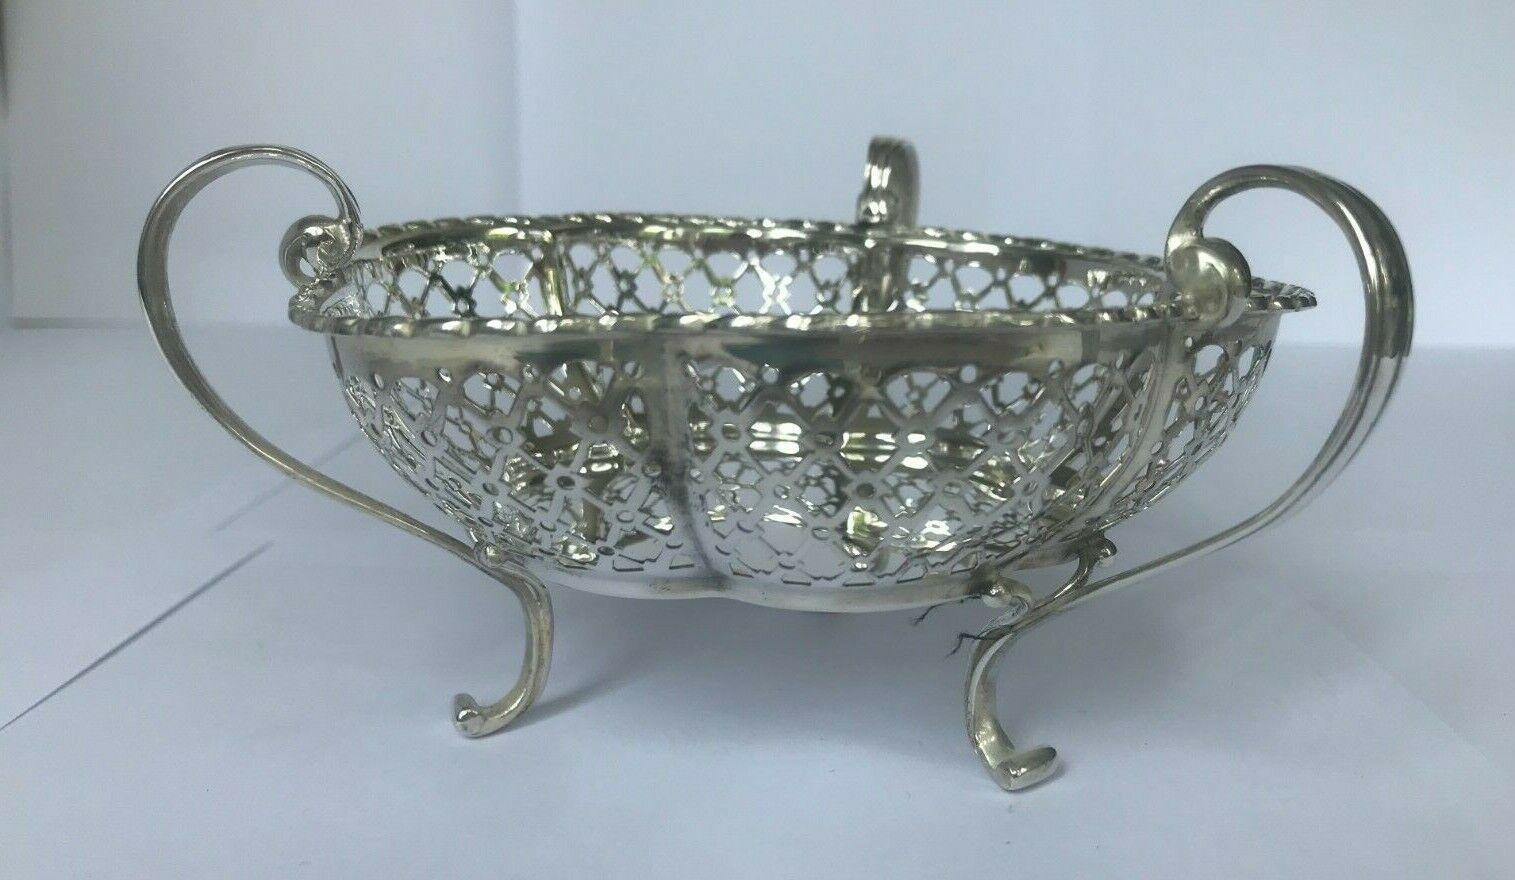 Women's Bonbon Dish in Sterling Silver by Synyer & Beddoes, 1910 For Sale